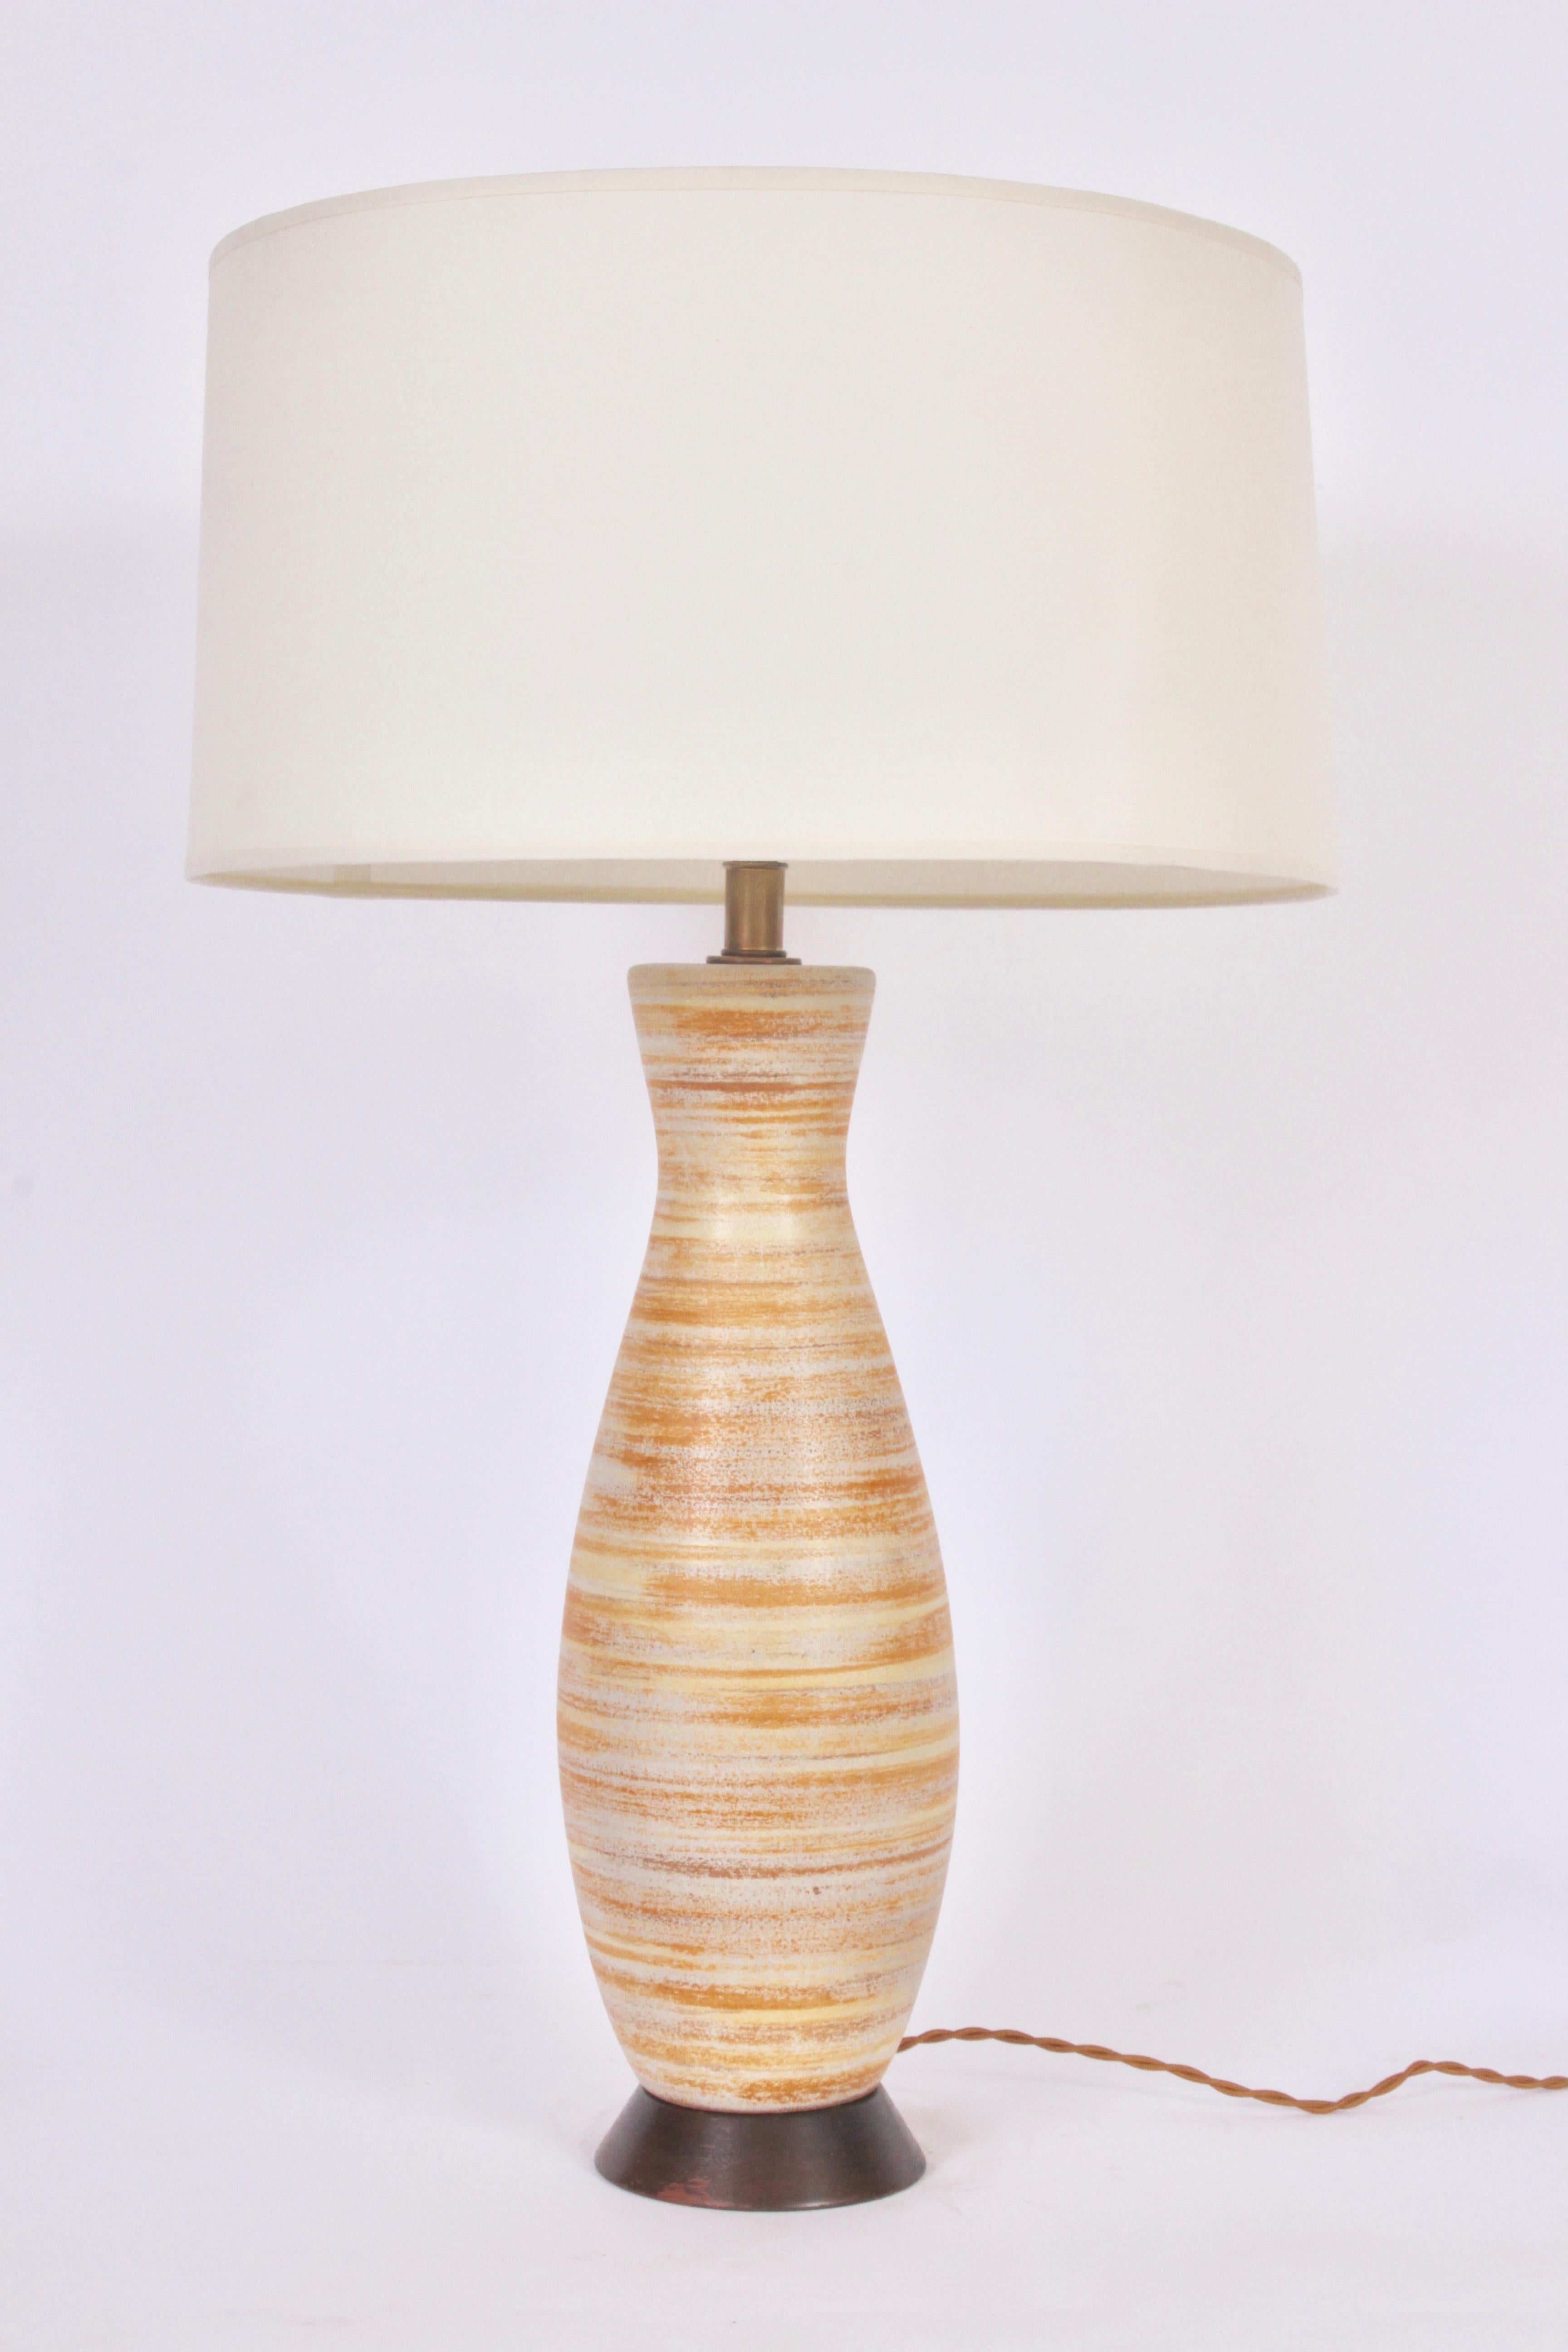 Brass Tall Design-Technics Pale Citrus Banded Pottery Table Lamp, C. 1950s For Sale